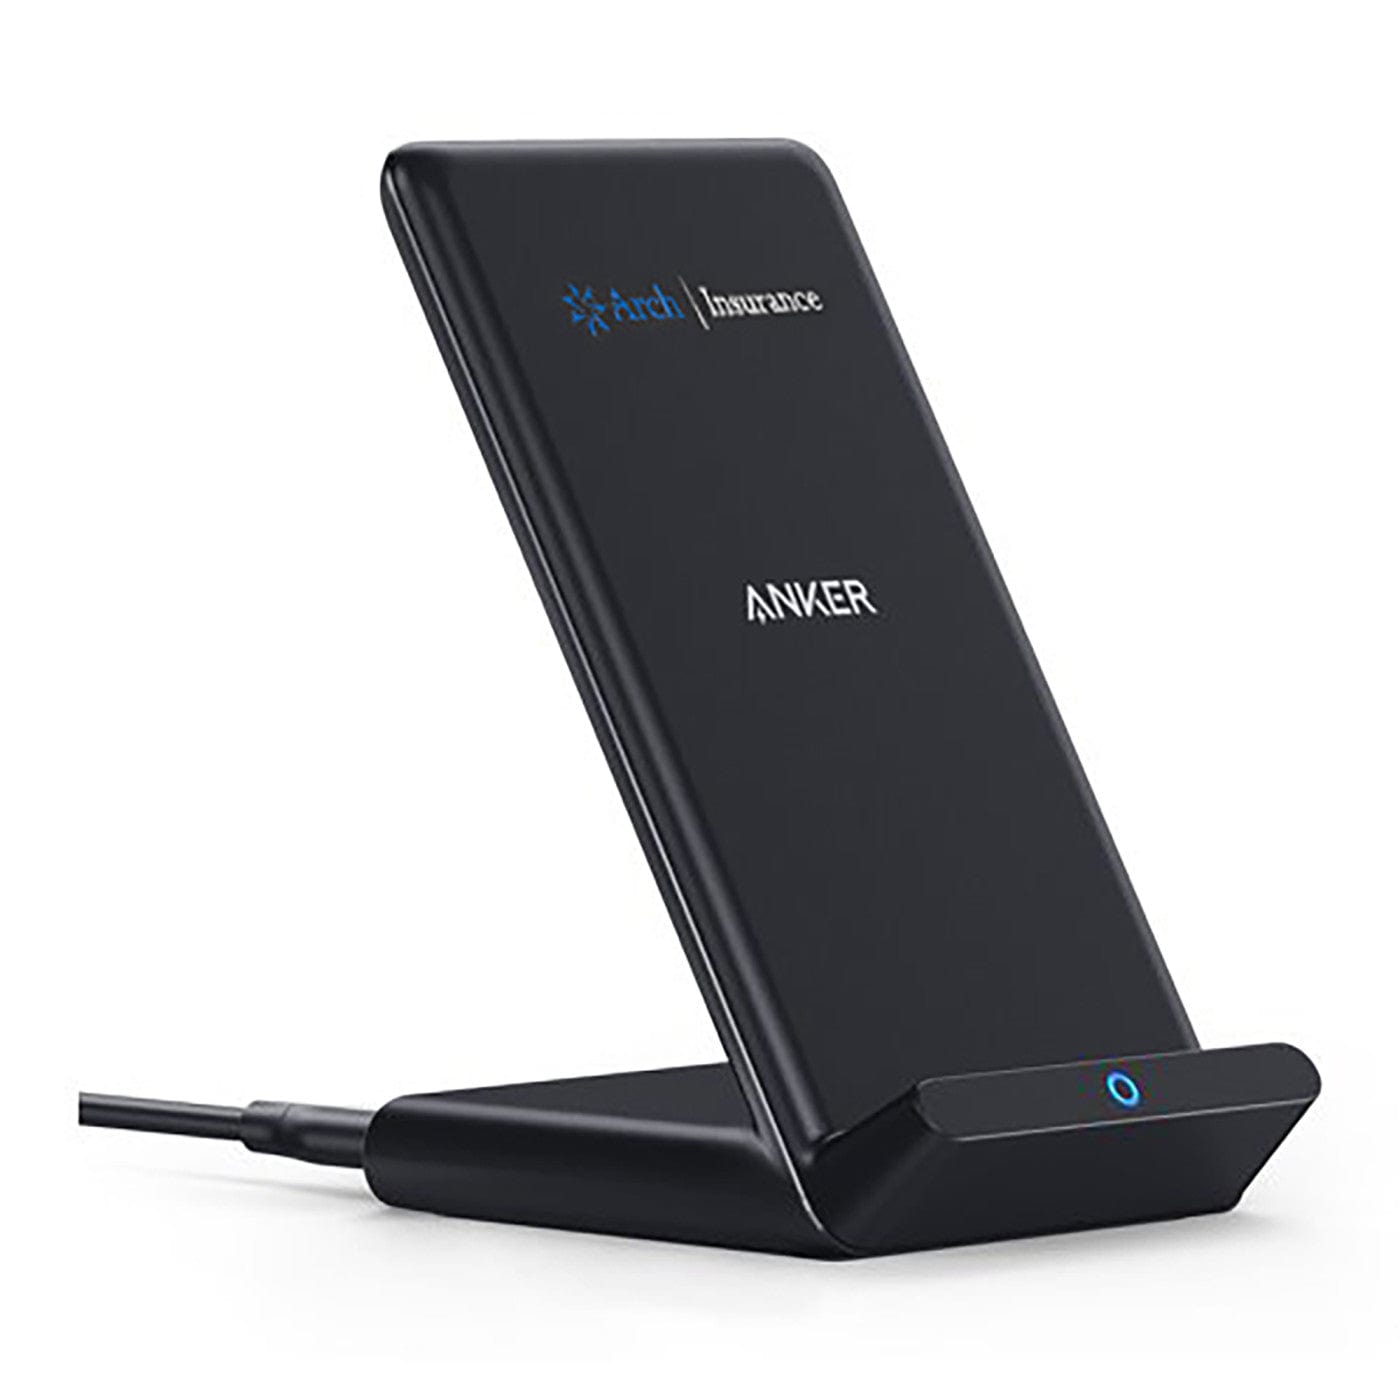 Anker Accessories One size / Black Anker - PowerWave 10W Stand w/ Charger